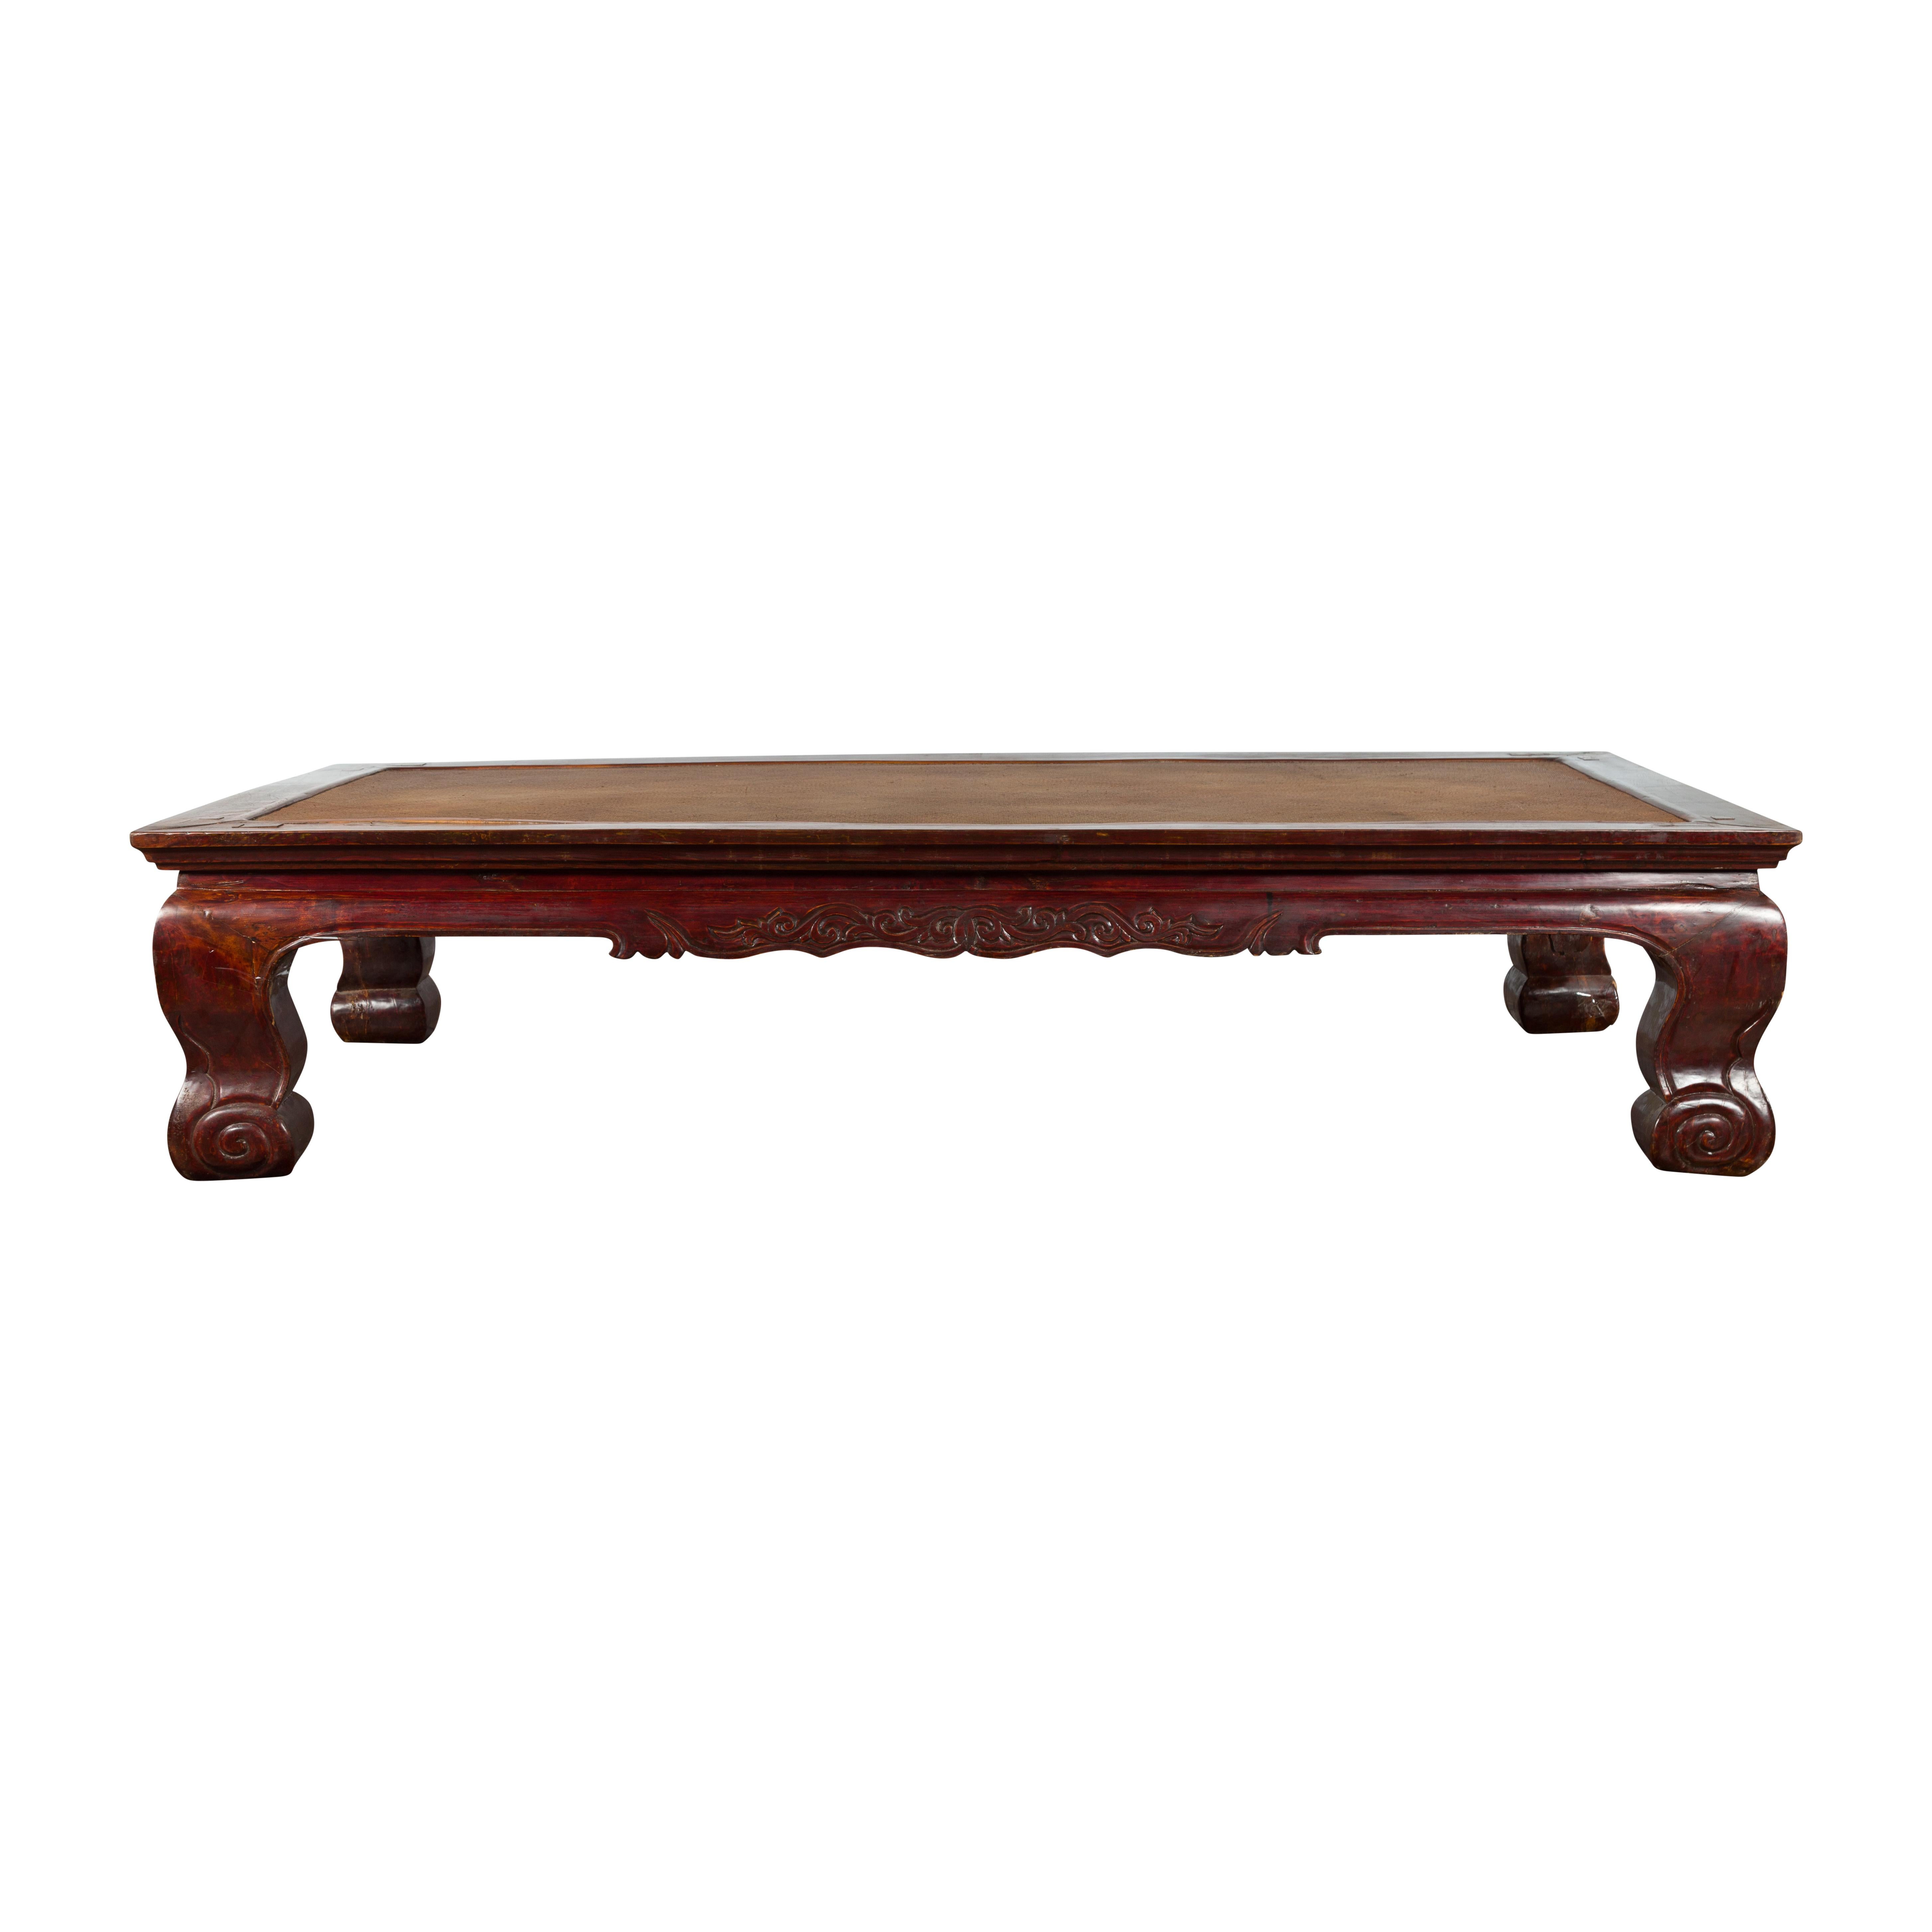 Chinese Qing Dynasty 19th Century Mahogany Stained Coffee Table with Rattan Top For Sale 16